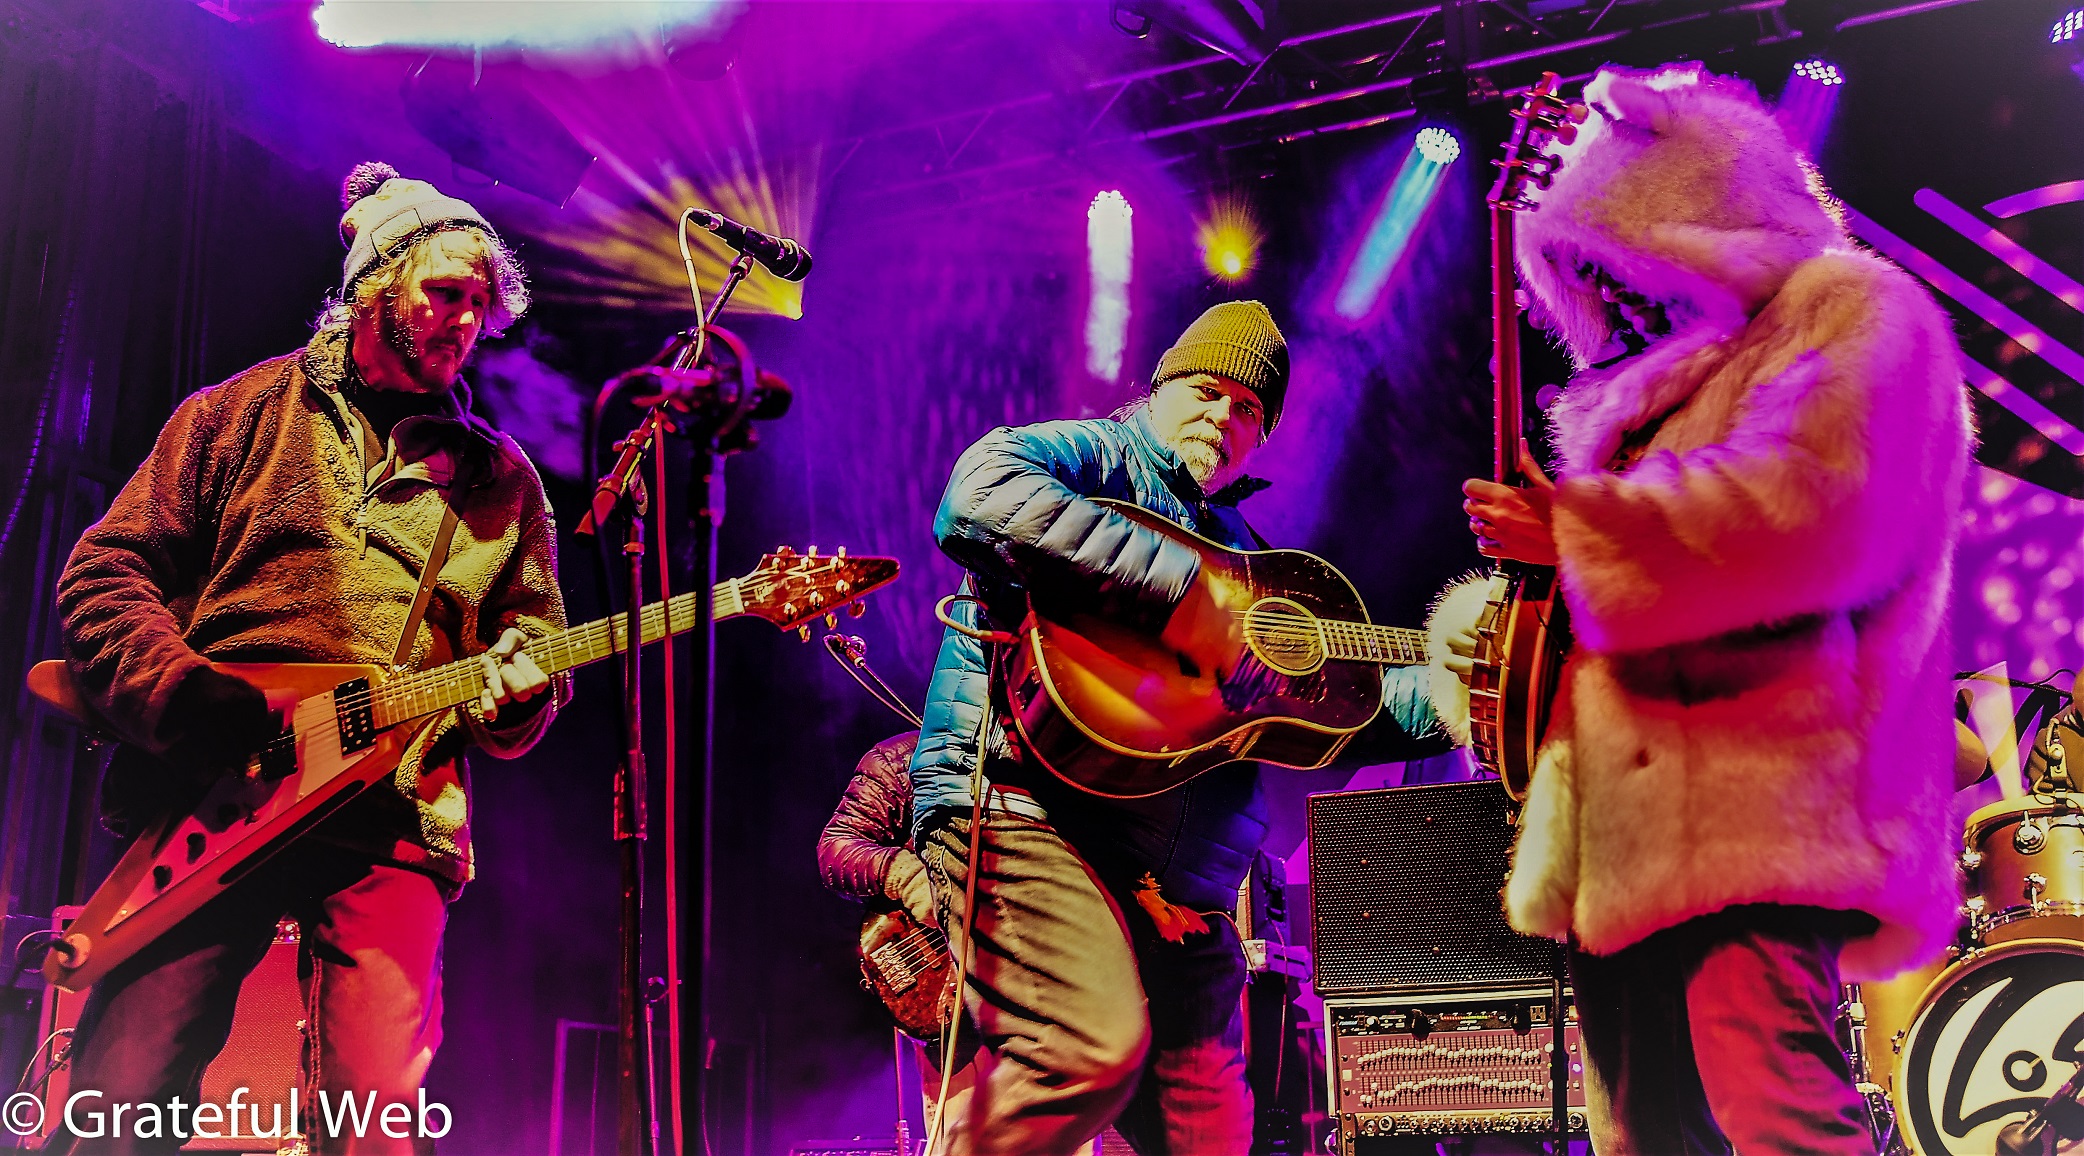 Leftover Salmon Announces Thanksgiving Leftovers: A Weekend of Giving